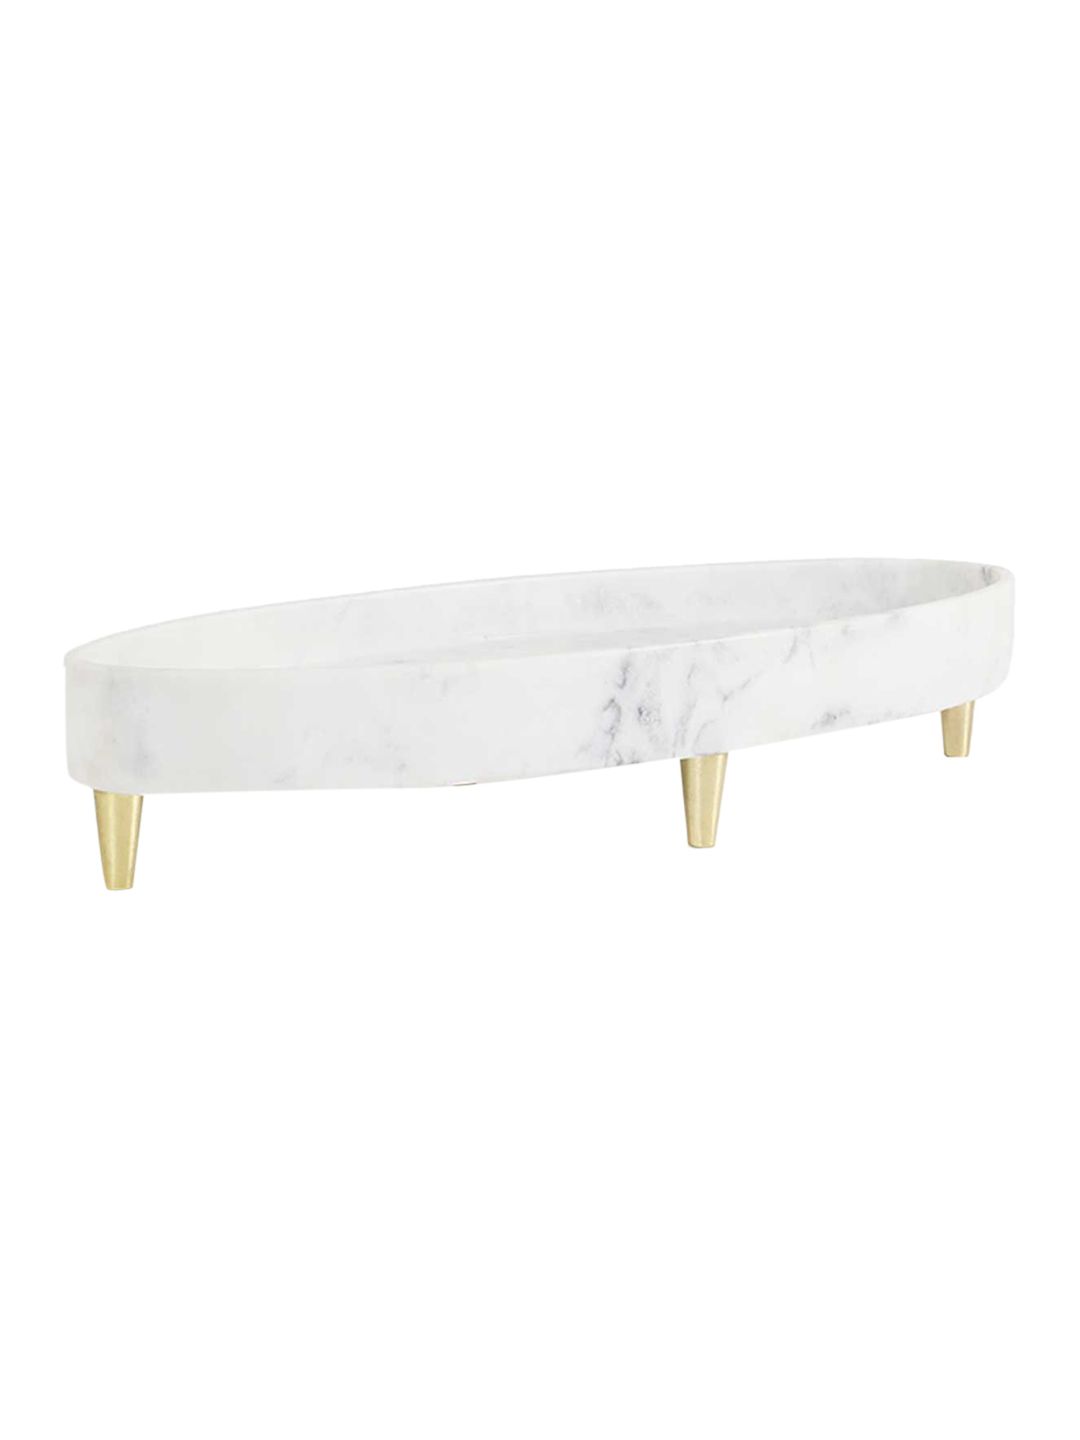 ellementry White Gondola Marble Platter with Brass Legs Price in India